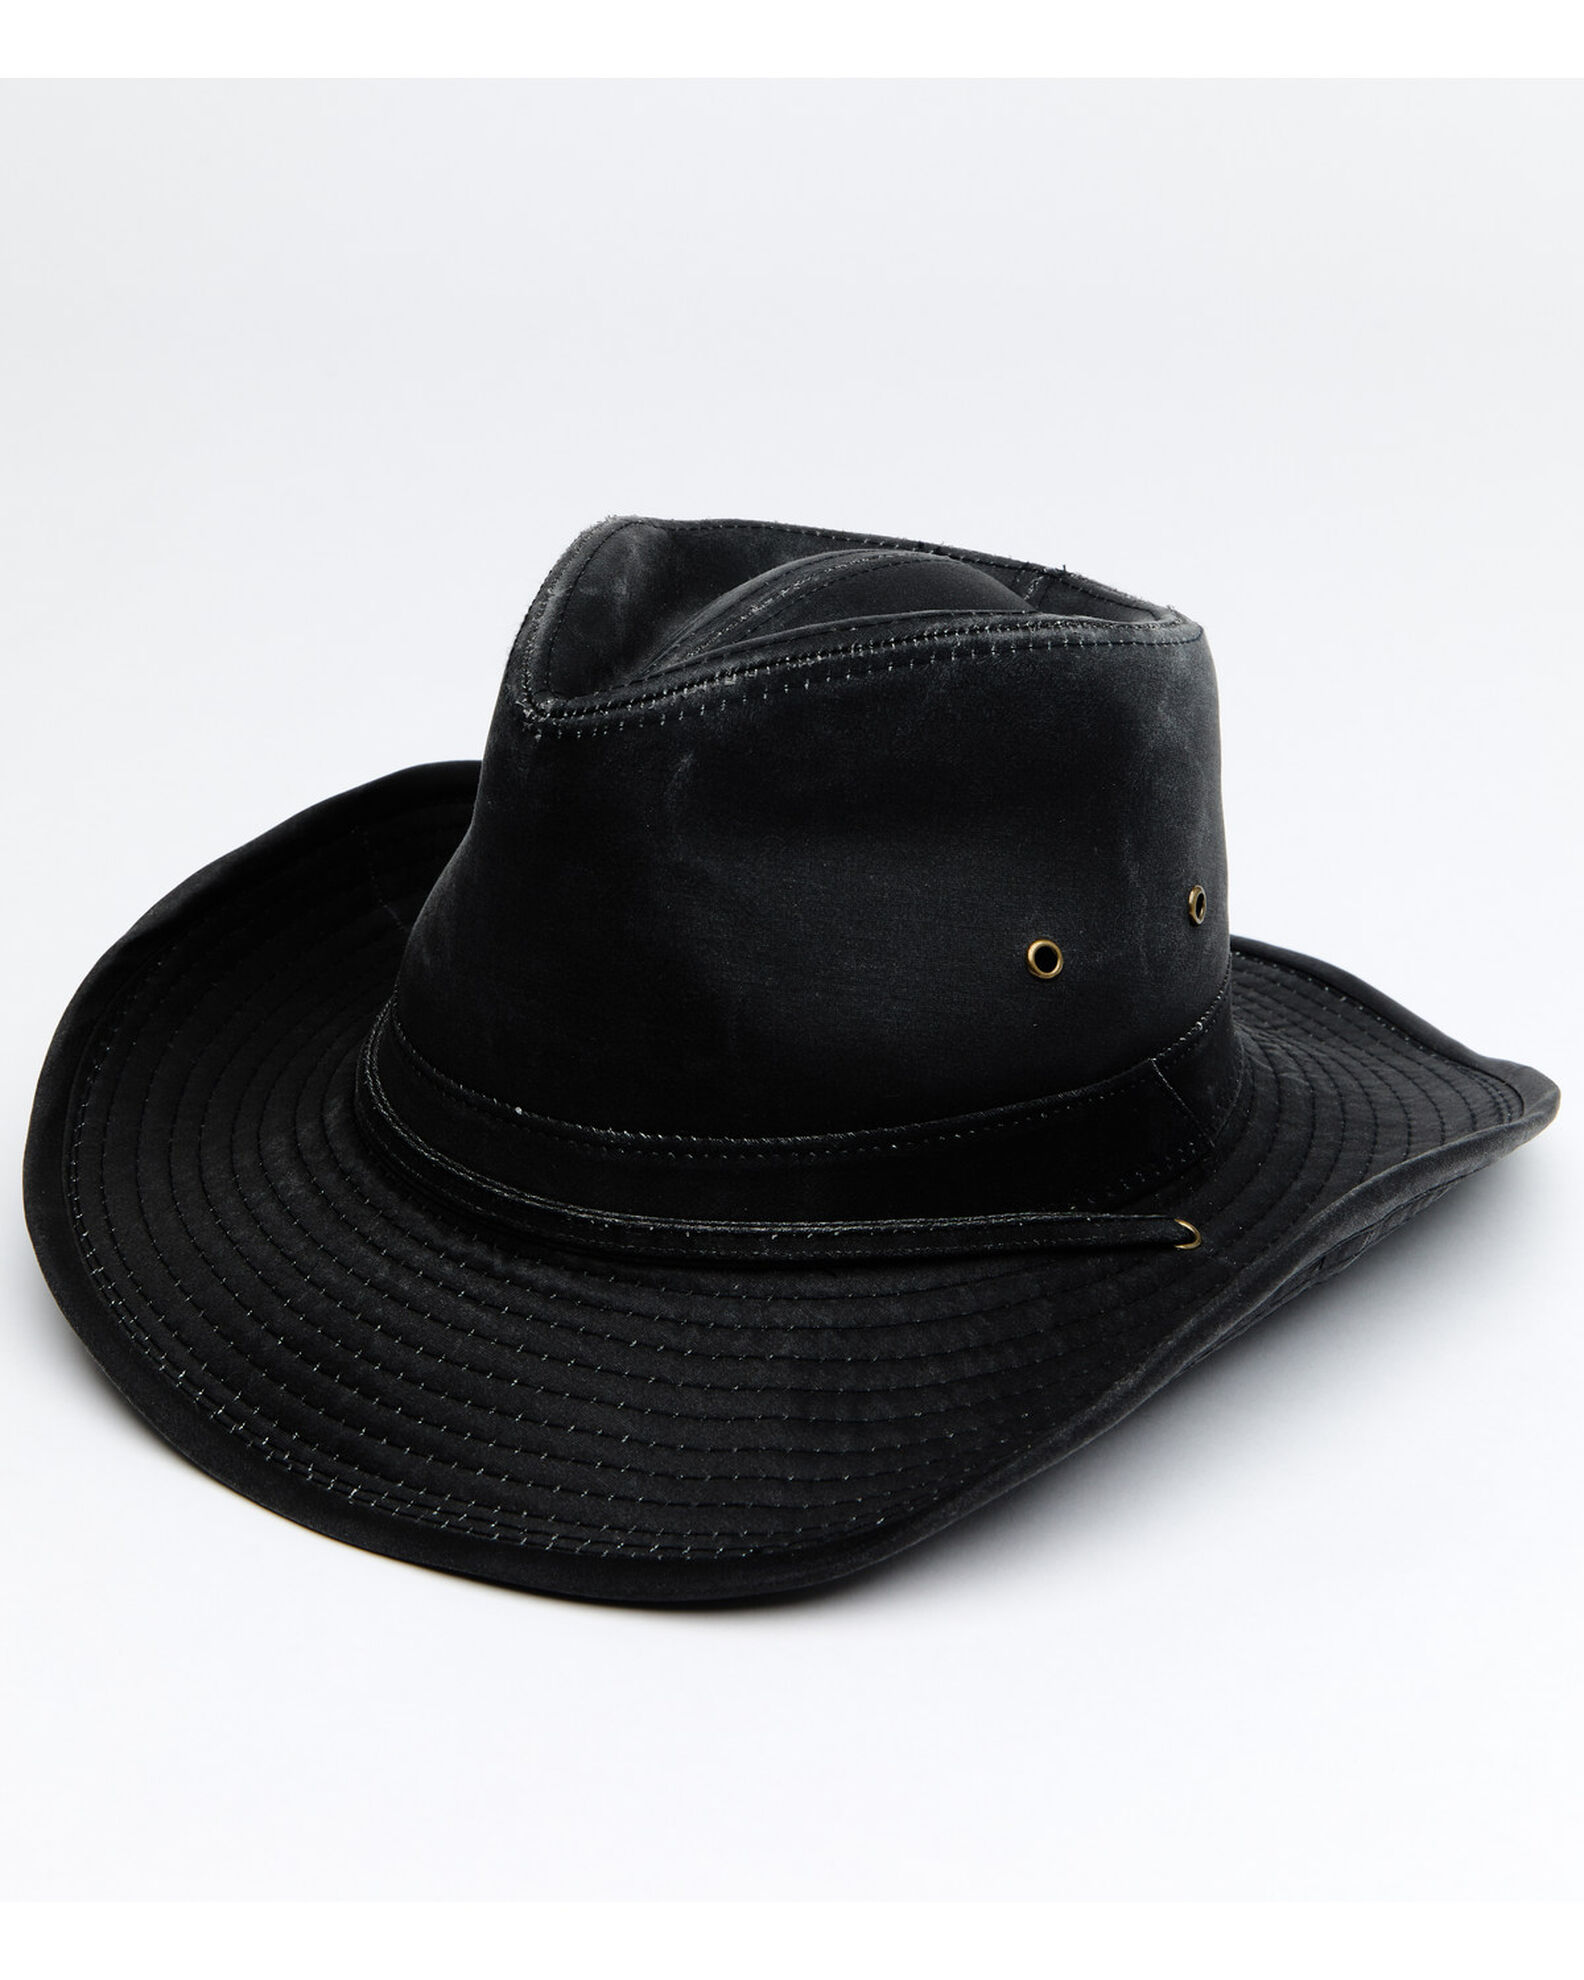 Hawx Men's Outback Weathered Cotton Sun Work Hat